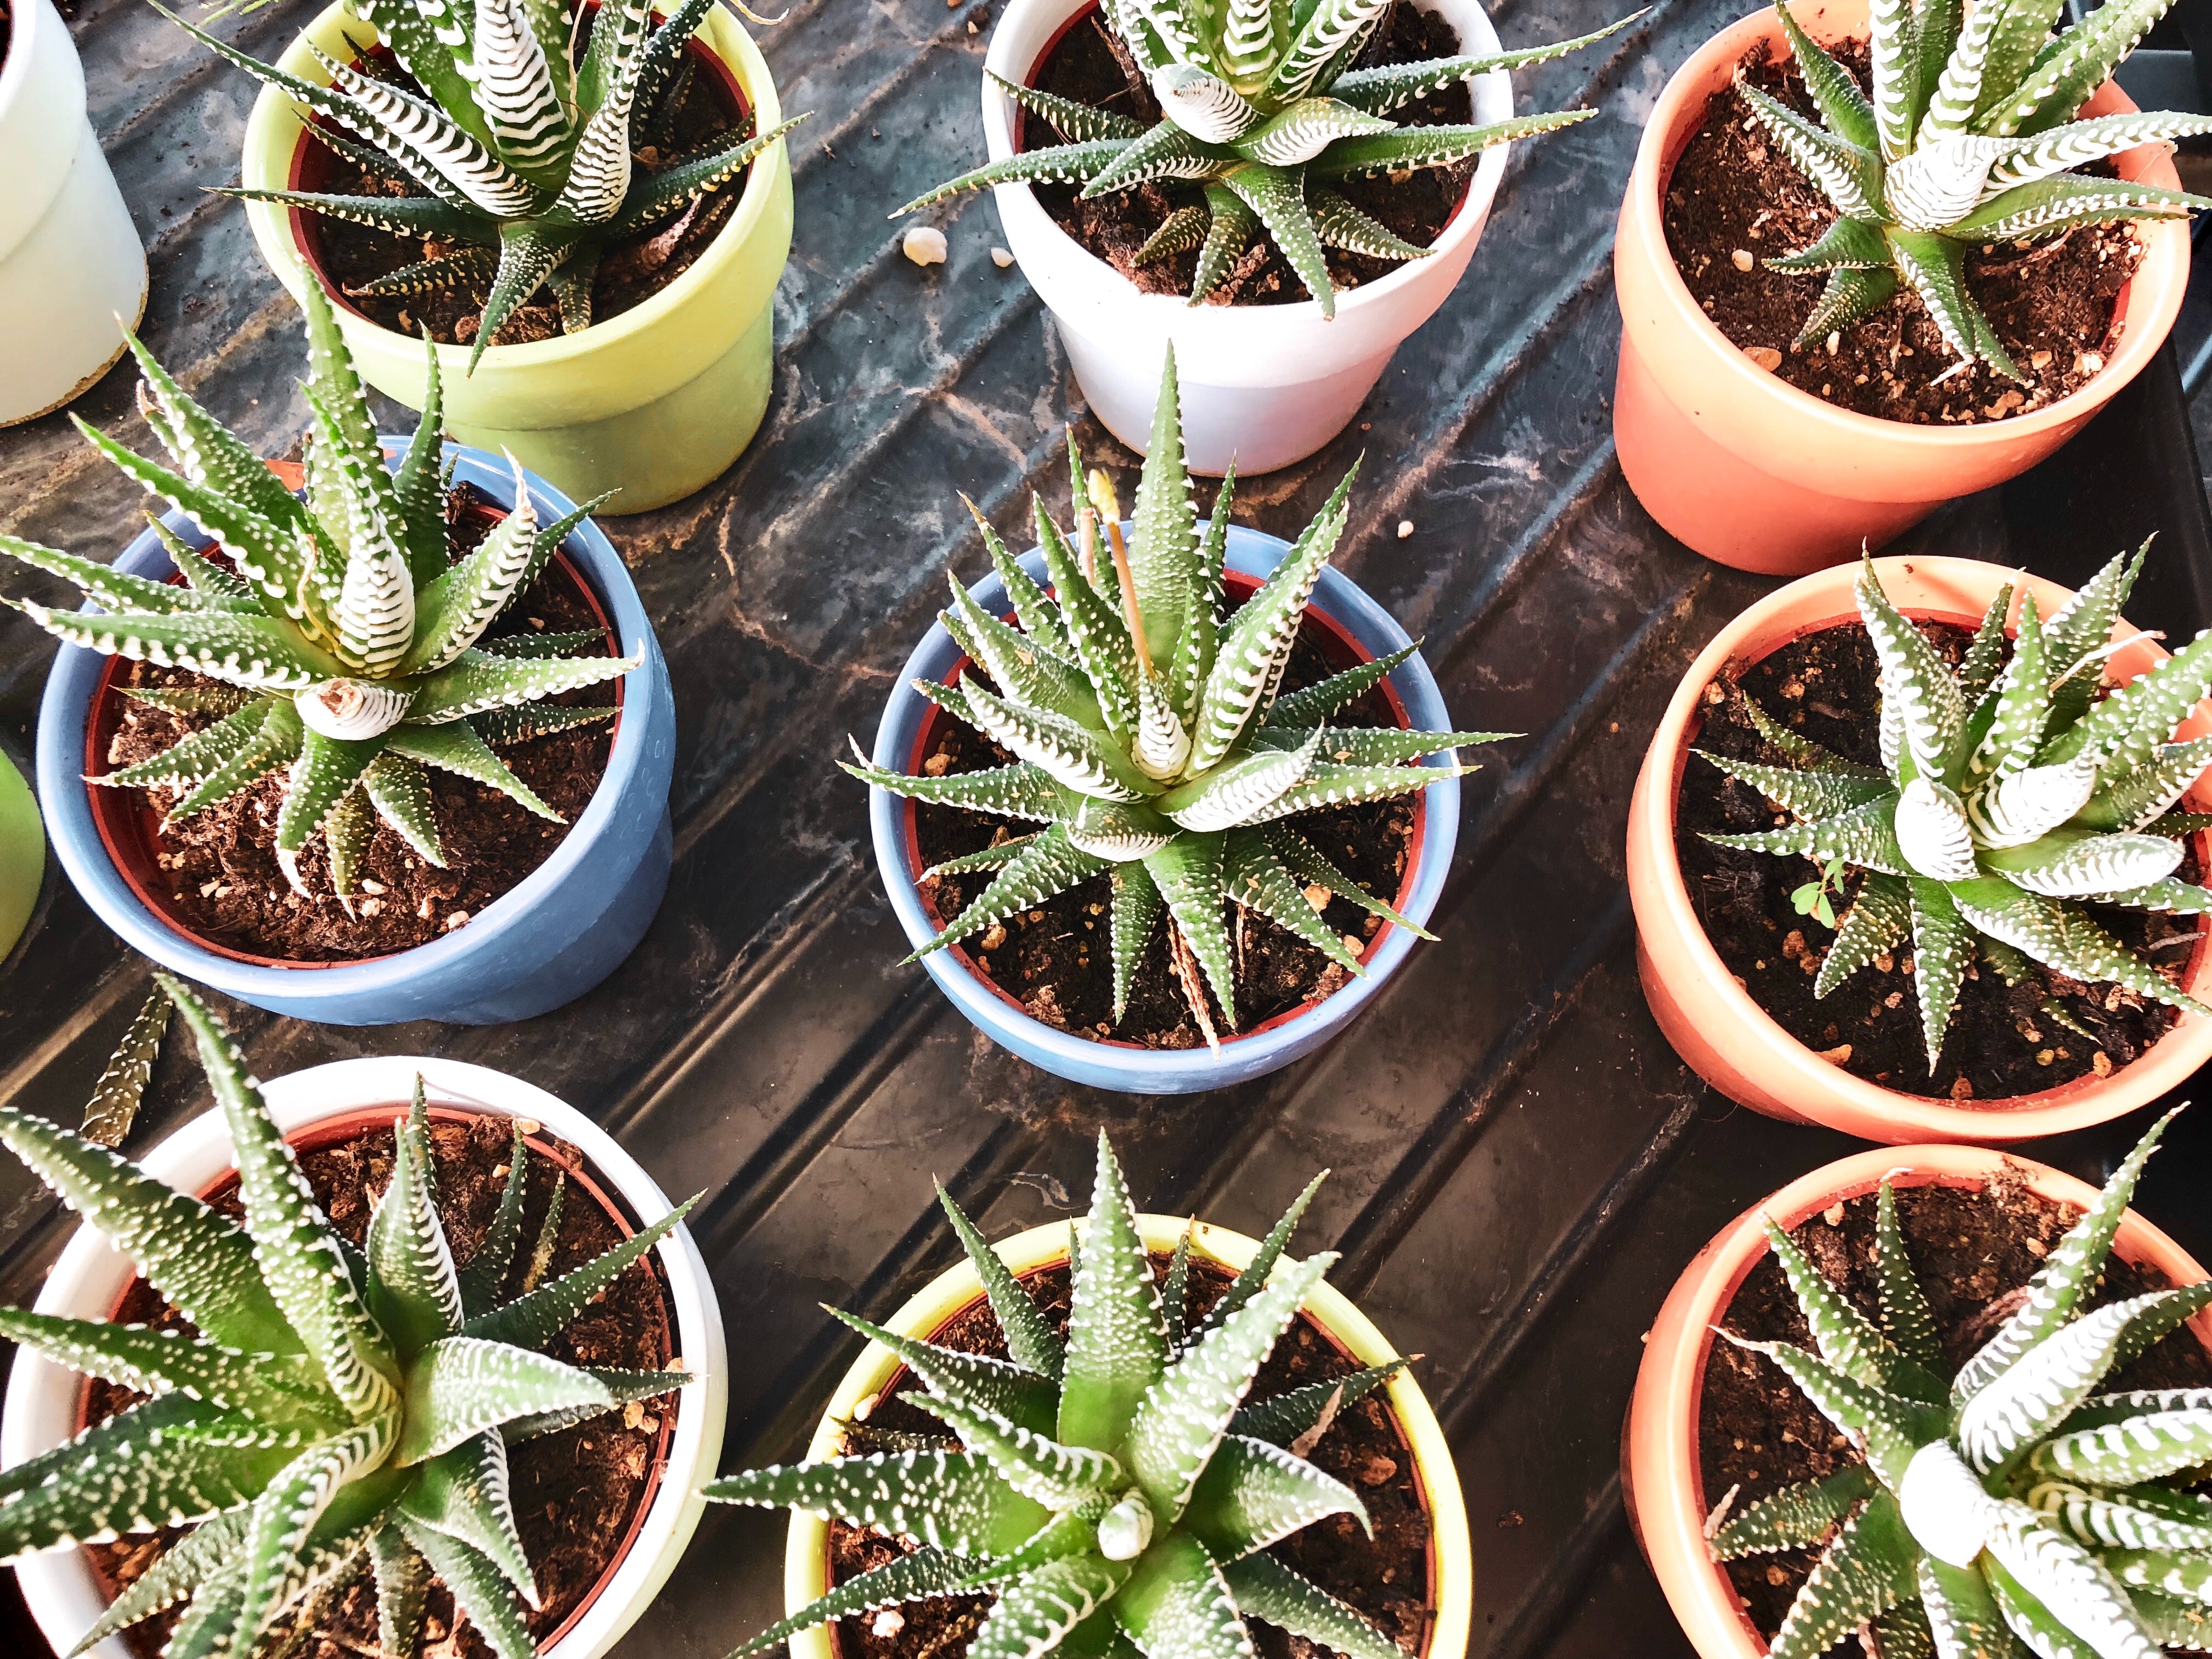 How to grow and care for aloe vera plant at home